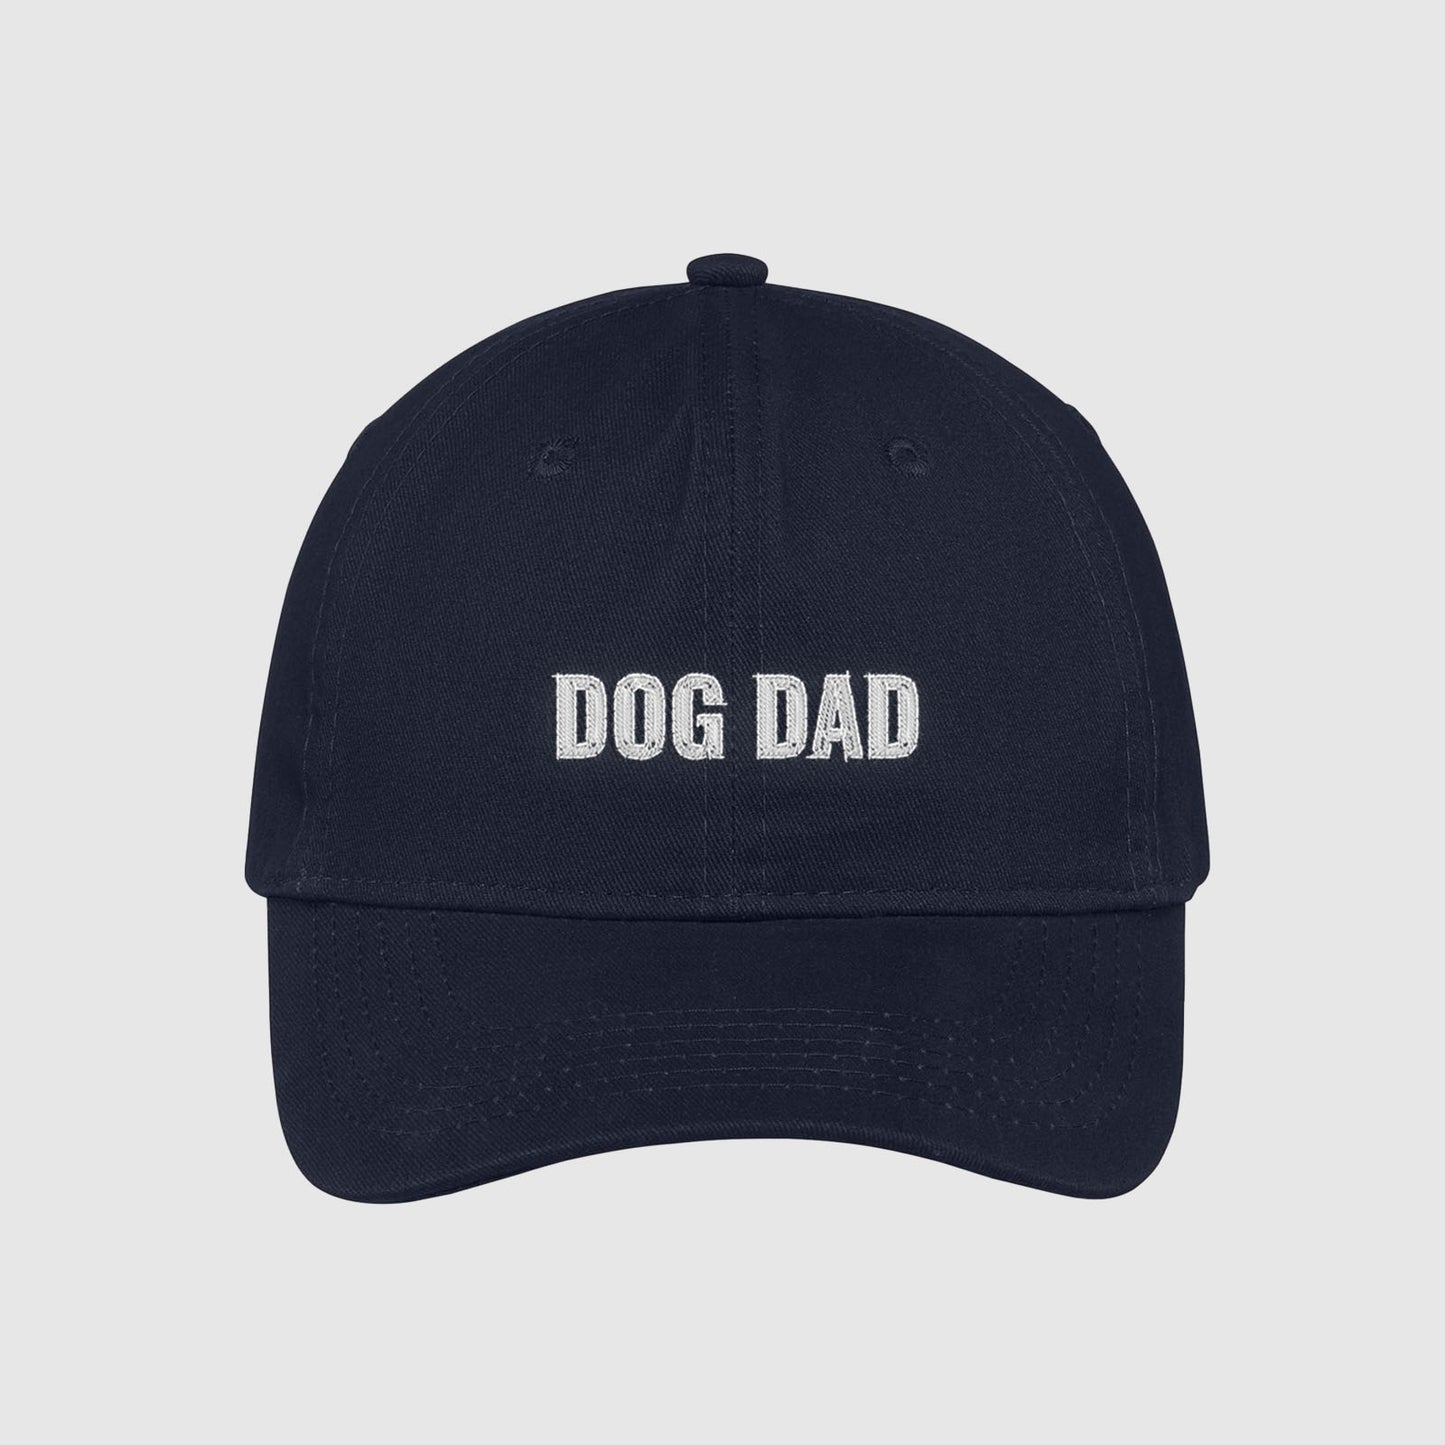 Navy Dog Dad Hat embroidered with white text